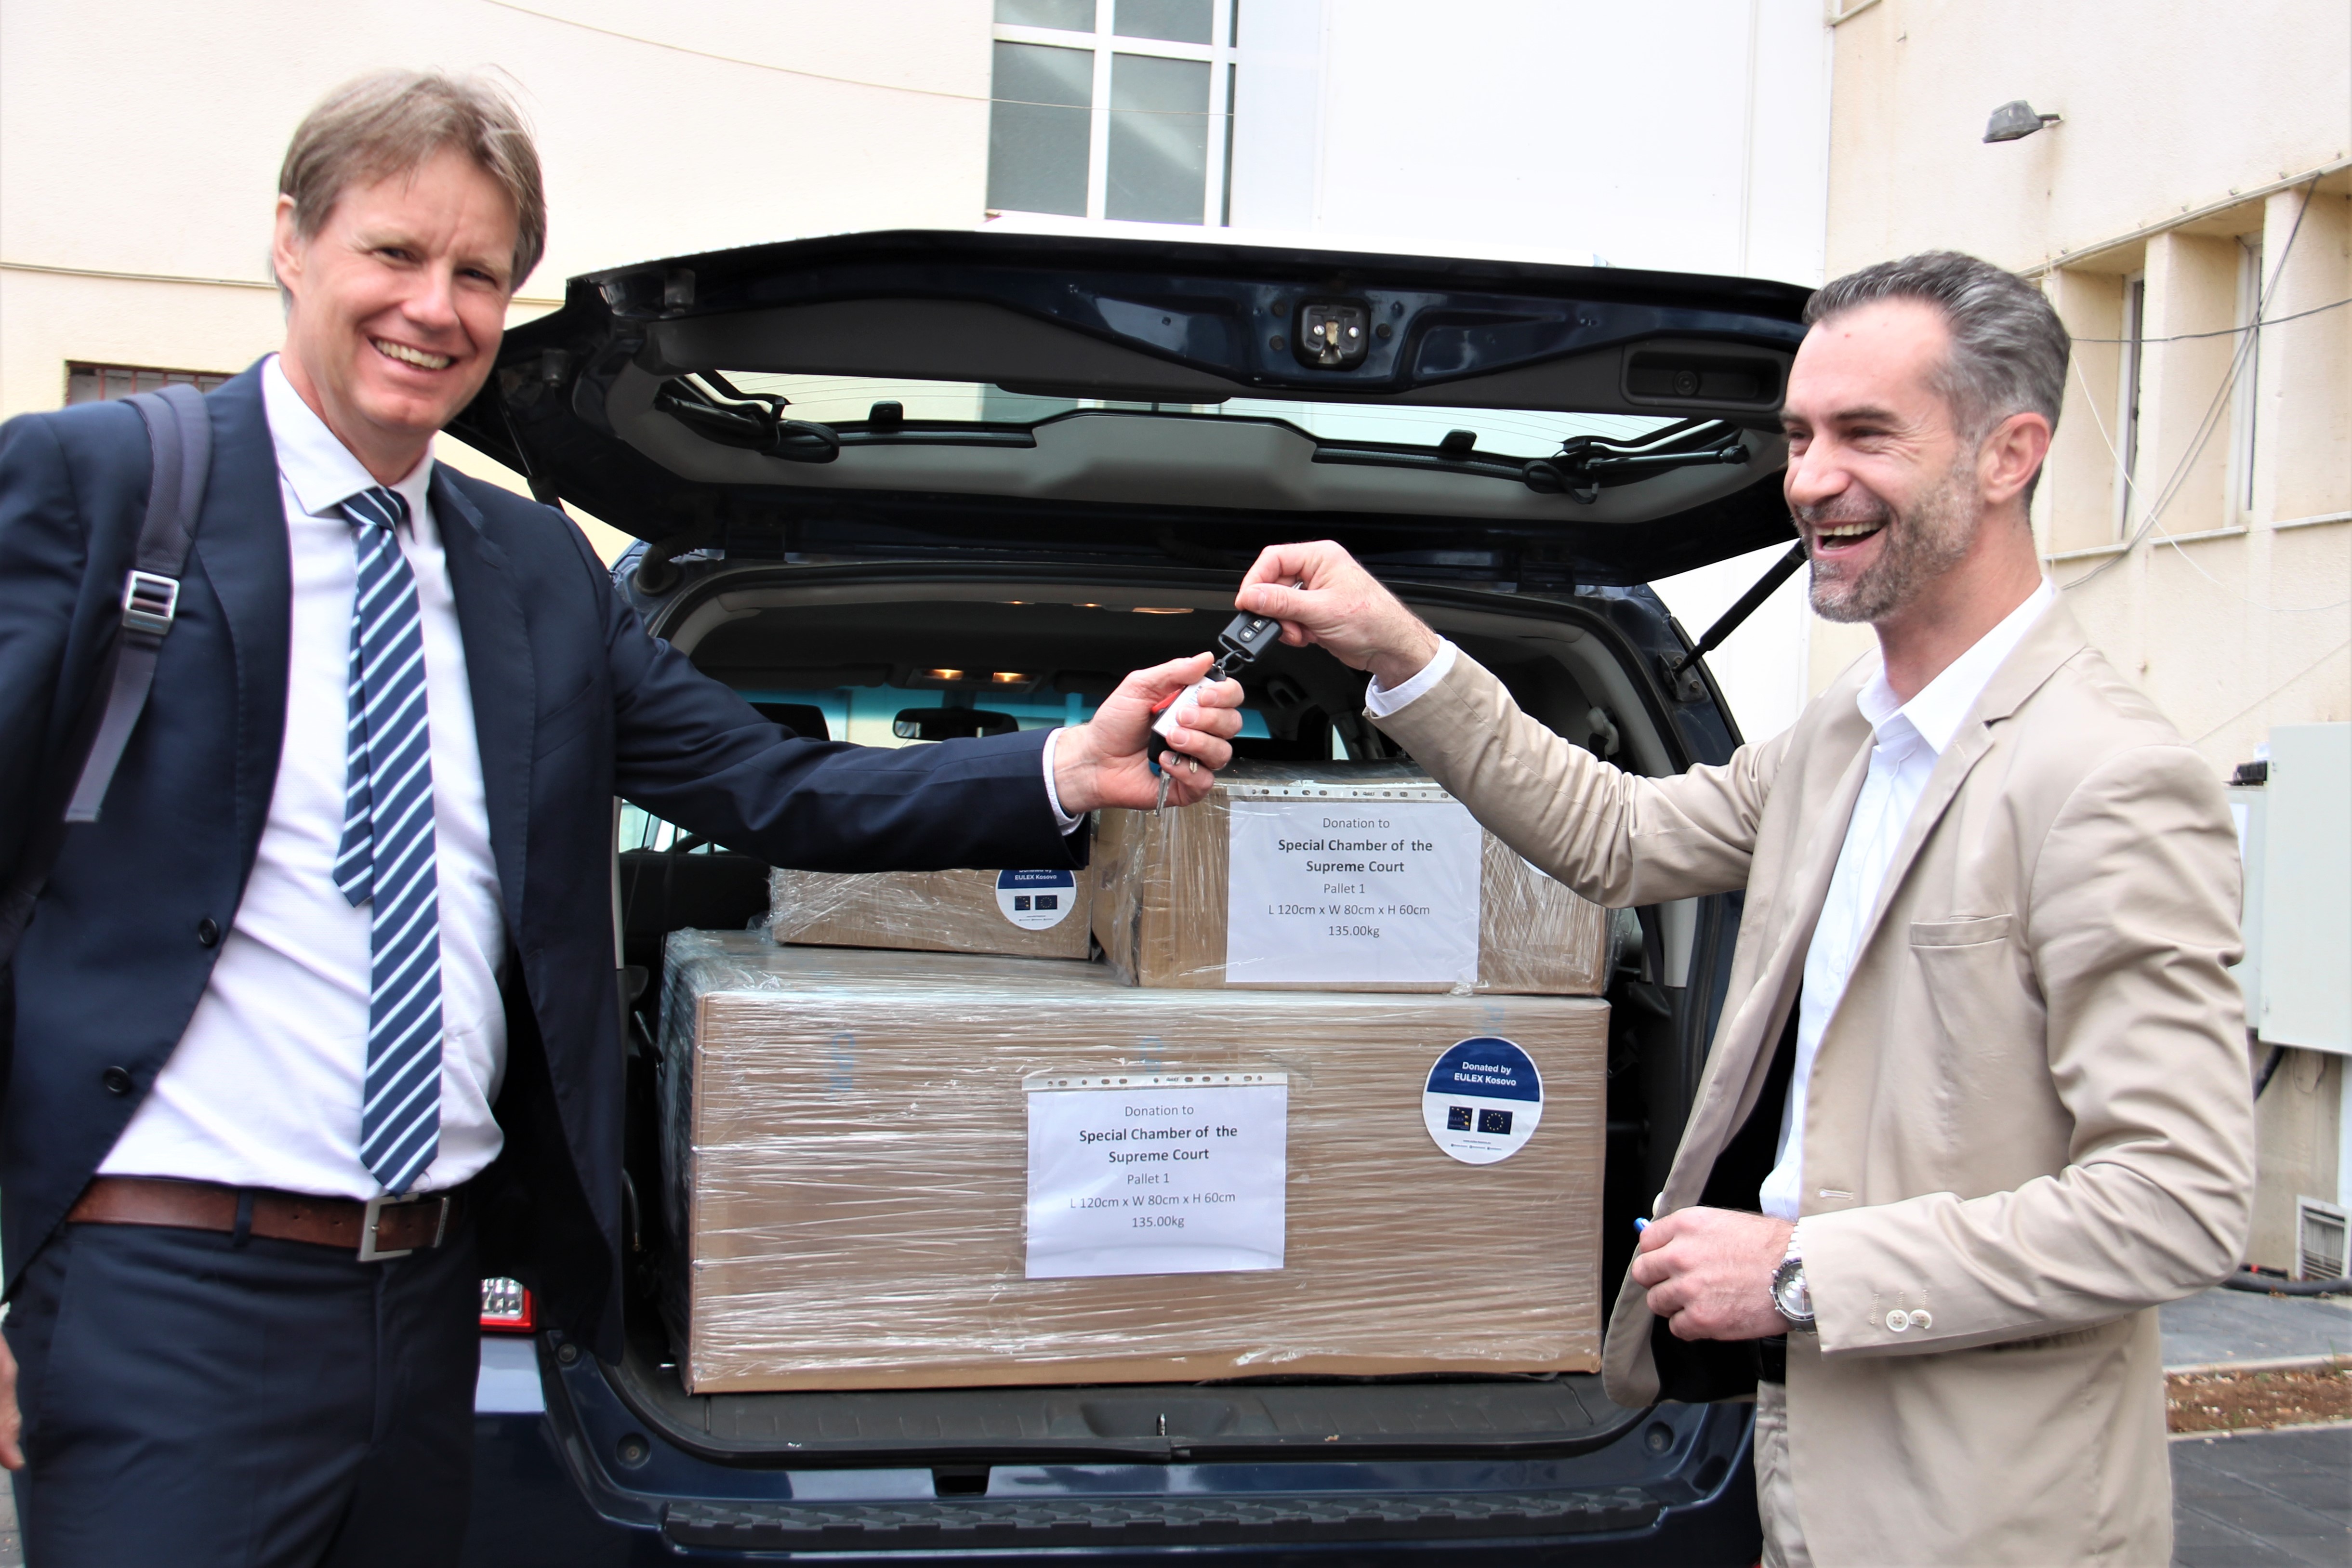 EULEX donates a vehicle and IT equipment to the Special Chamber of the Supreme Court